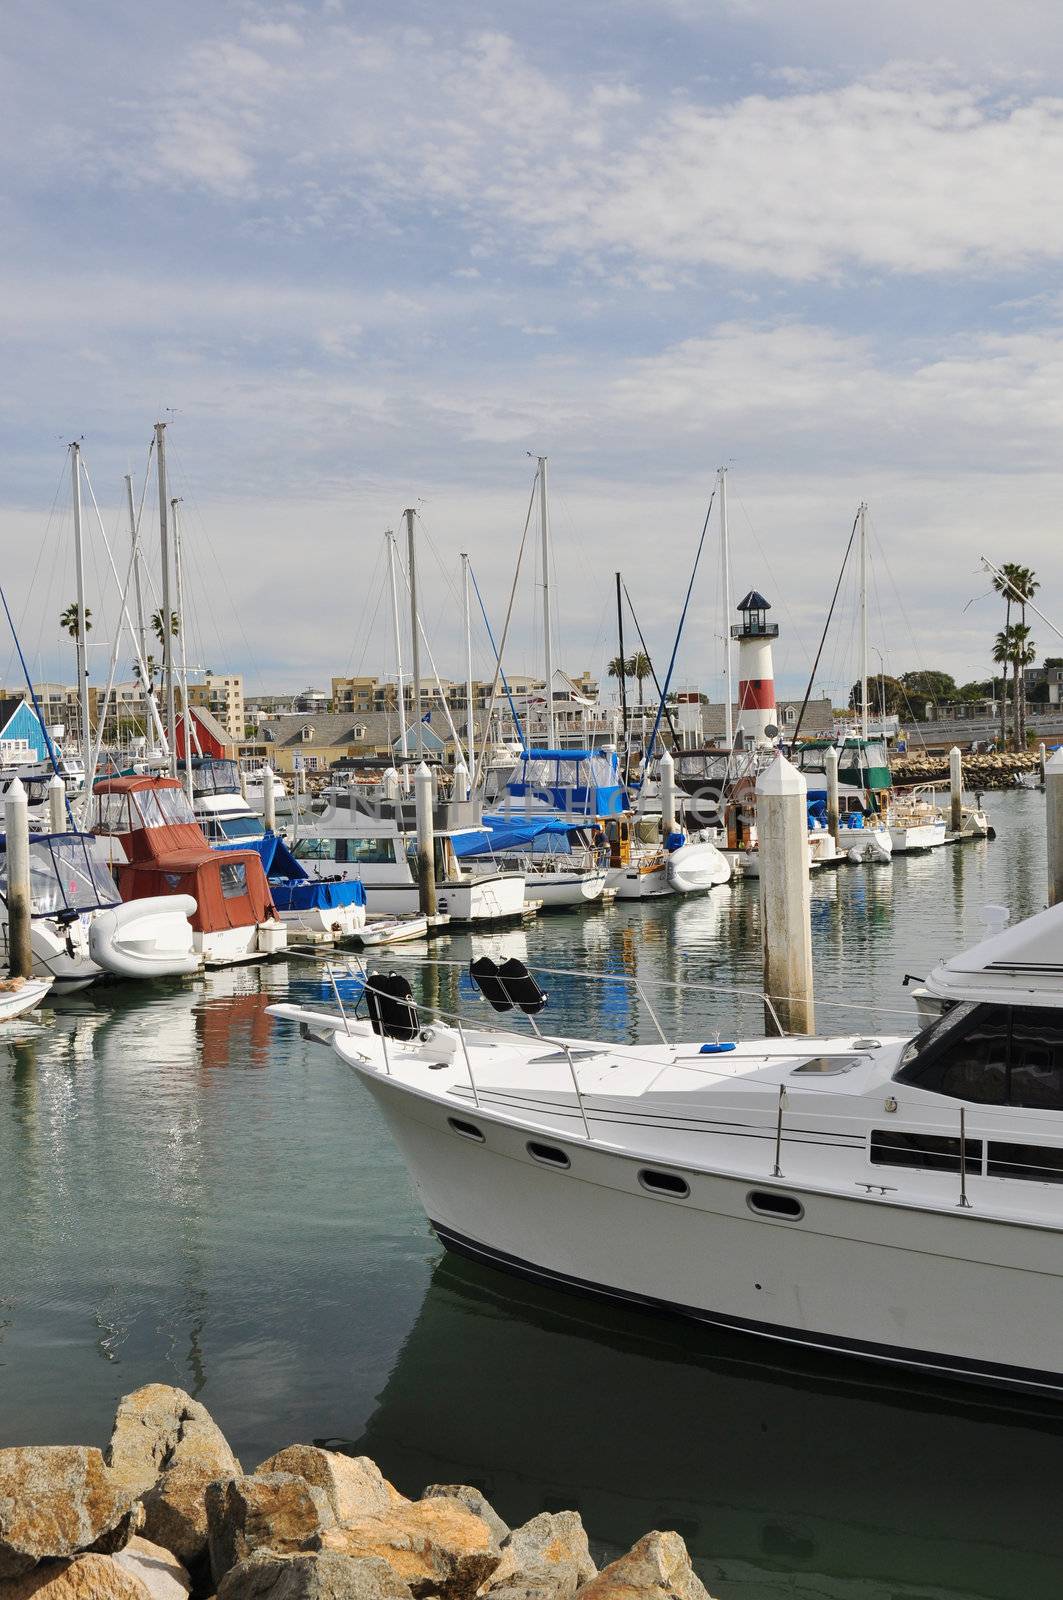 Boats and yachts are anchored at a small harbor in Oceanside, California.